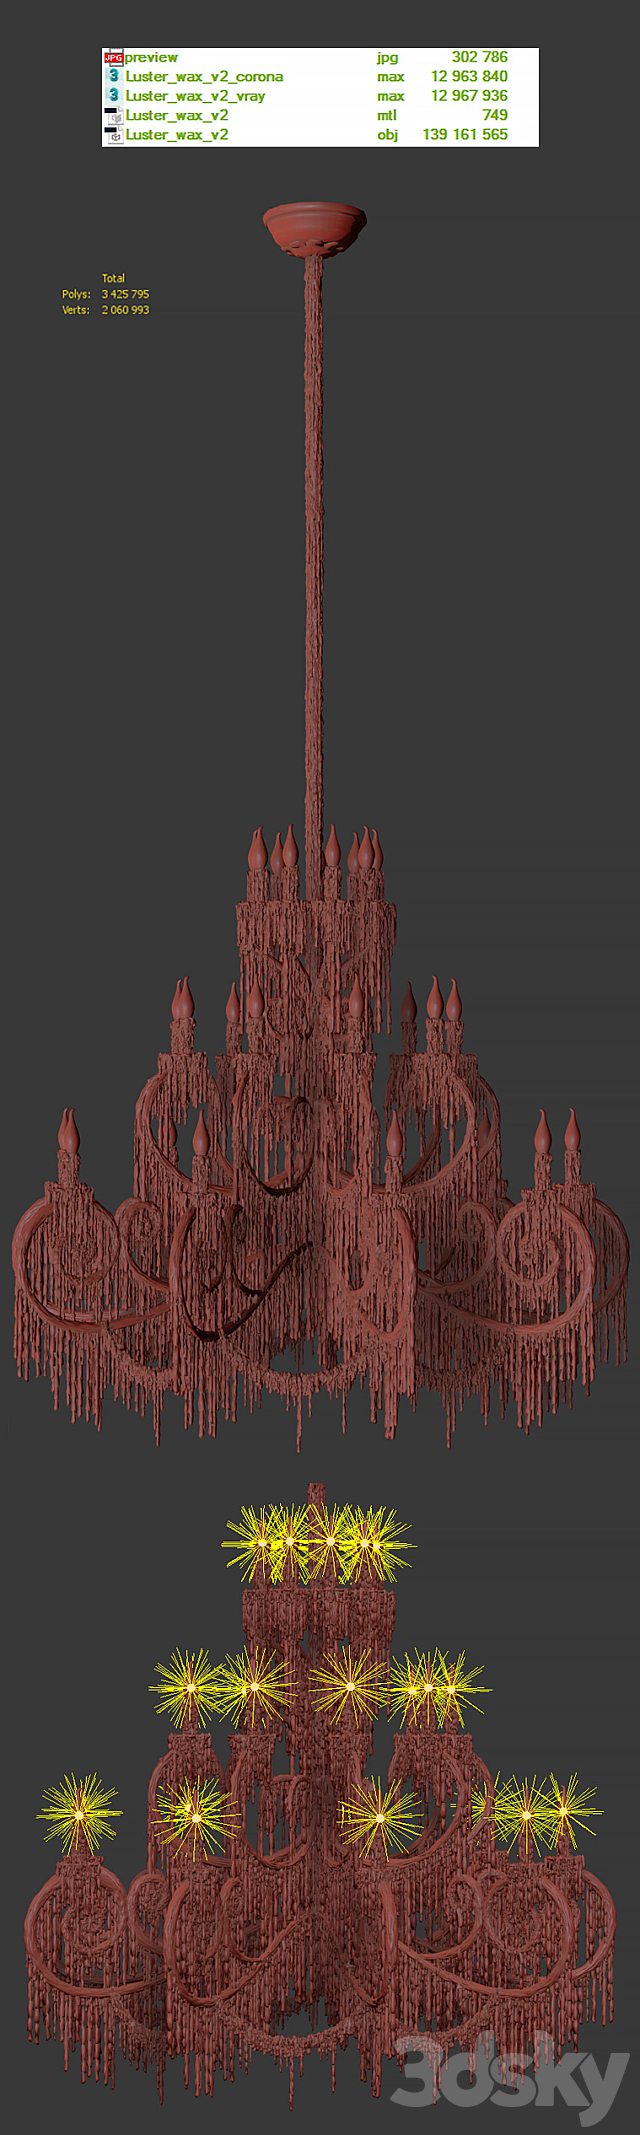 Chandelier bathed in wax 3DSMax File - thumbnail 3